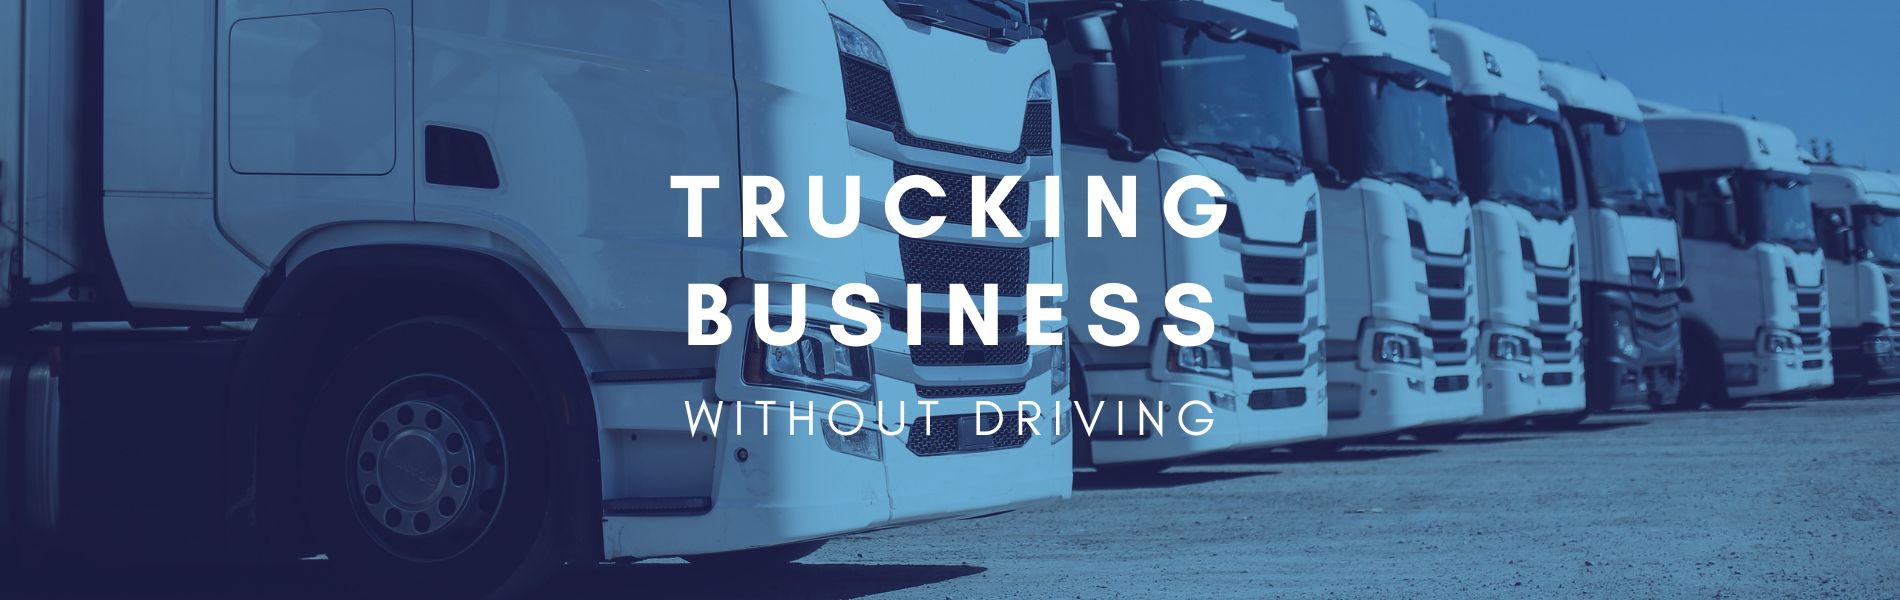 how to start a trucking business without driving